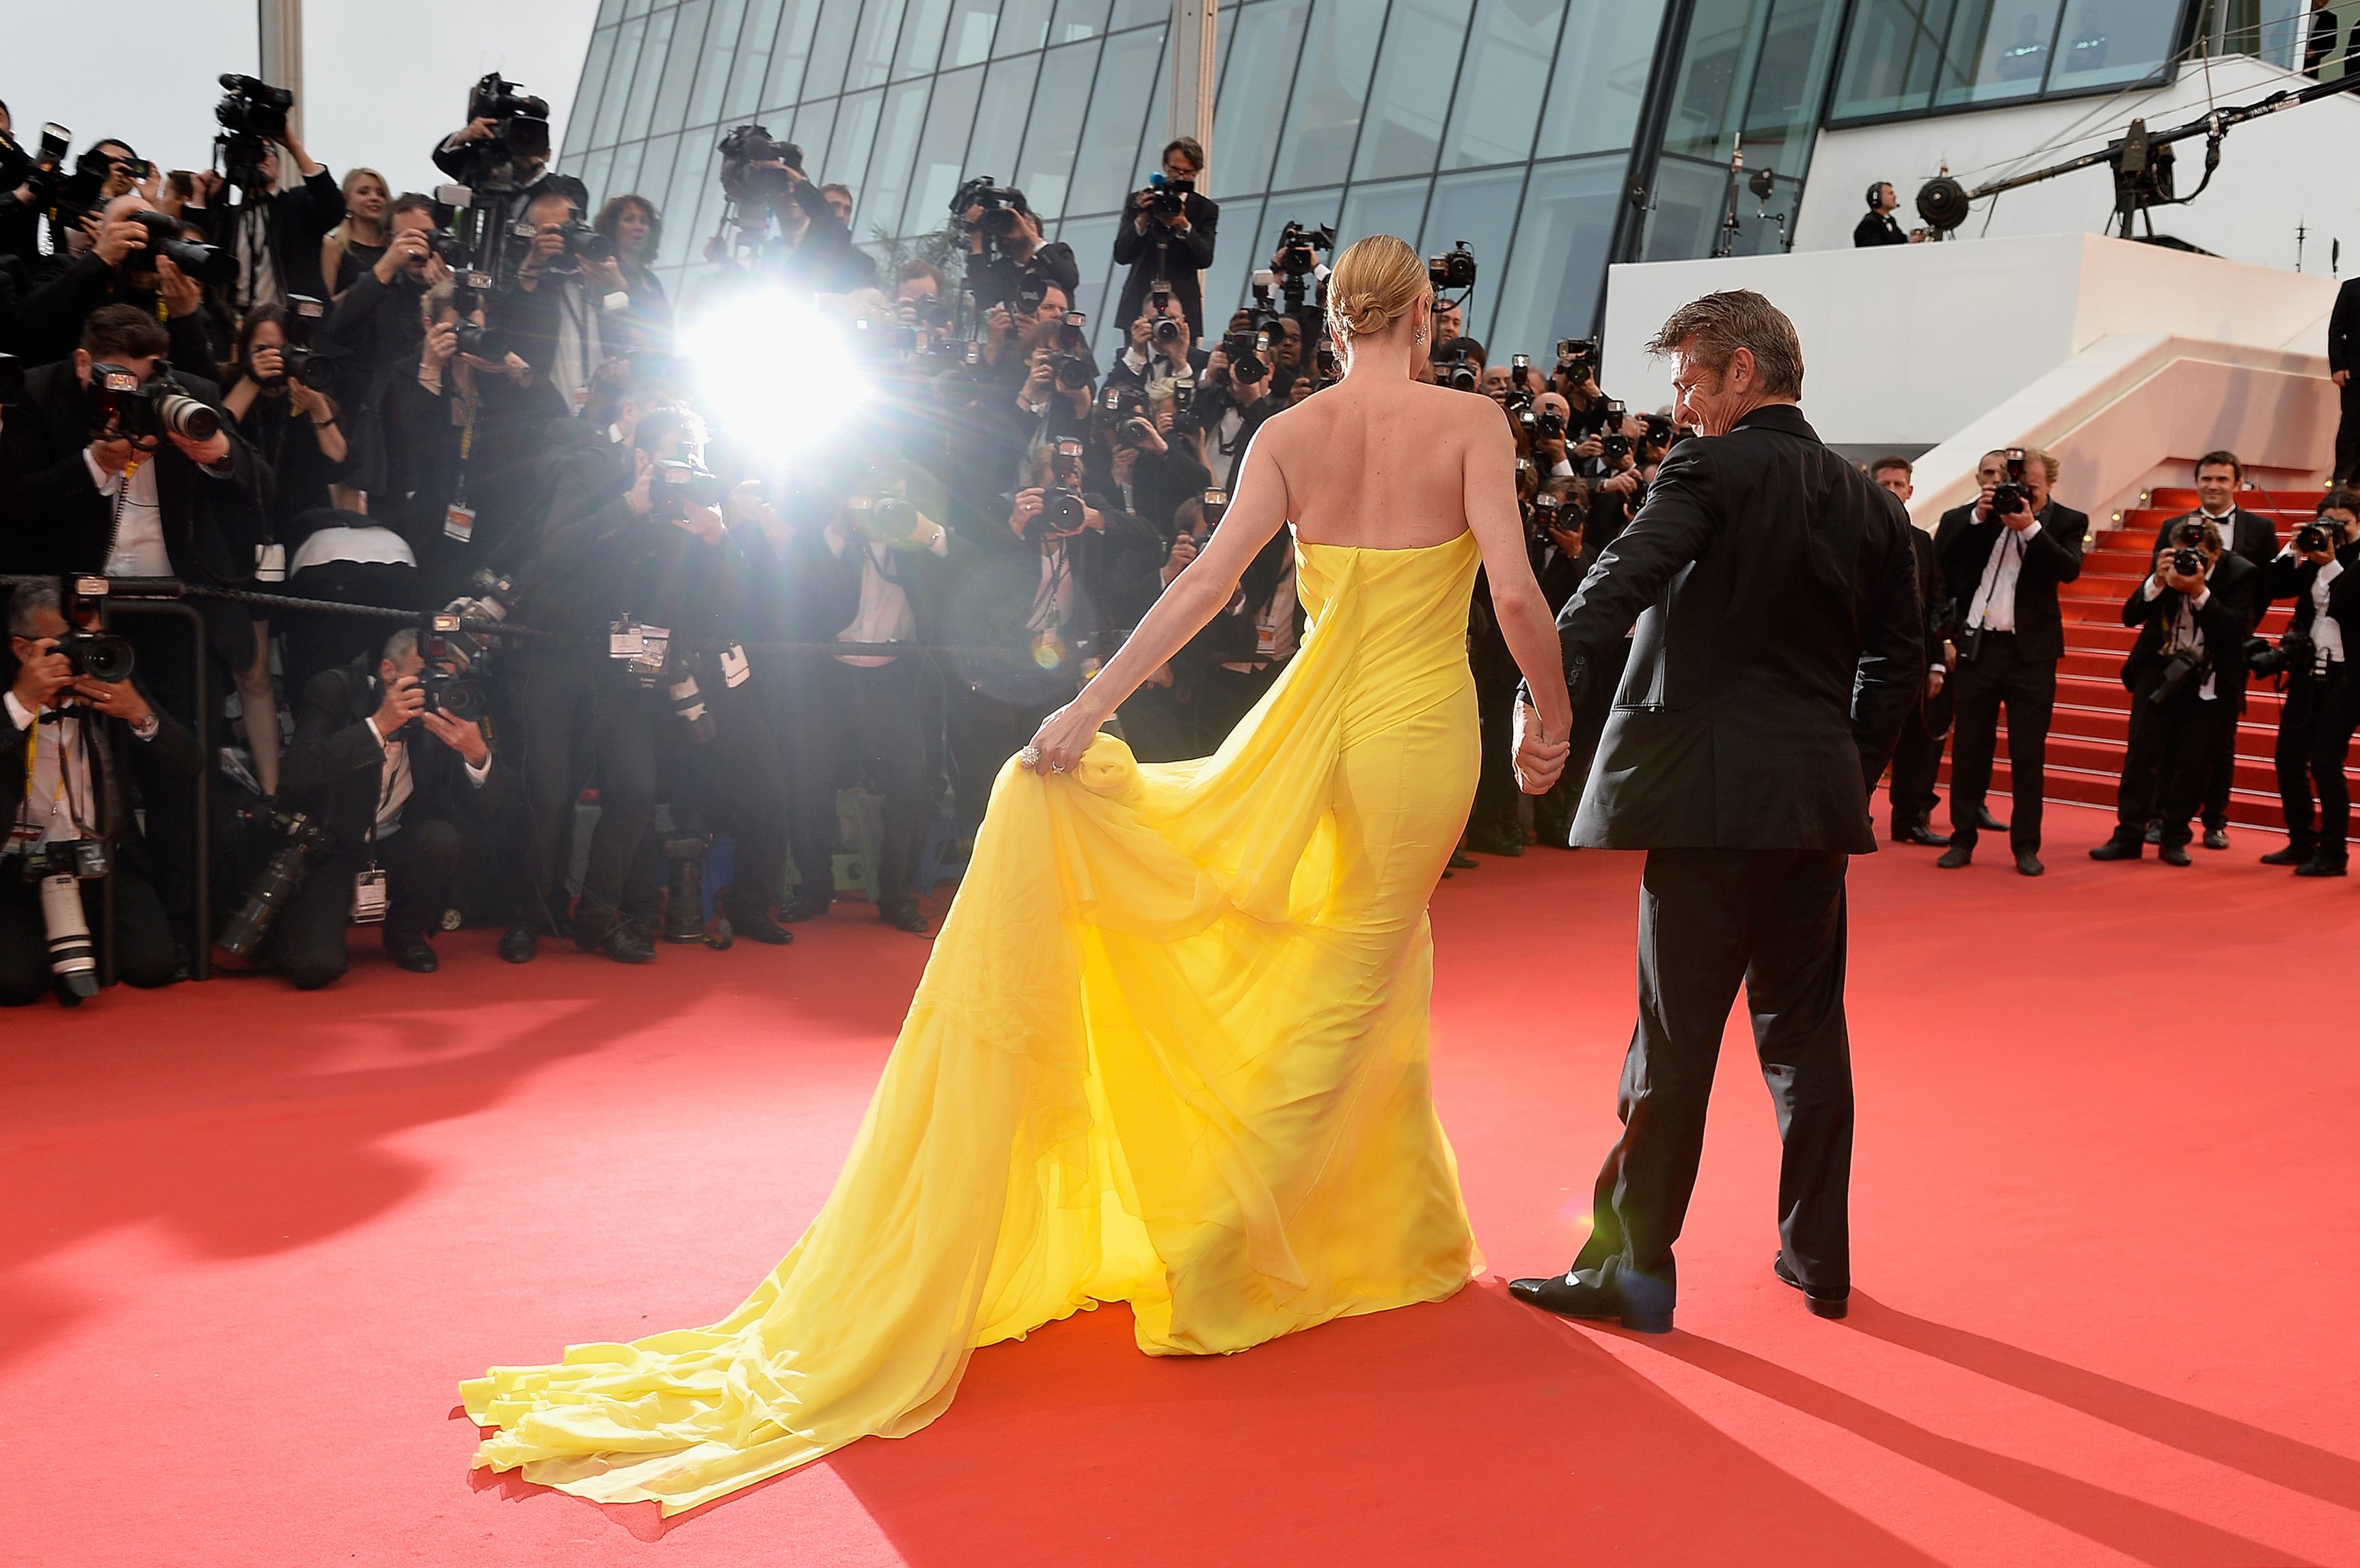 Charlize shines at Cannes while Sean Penn takes a step back